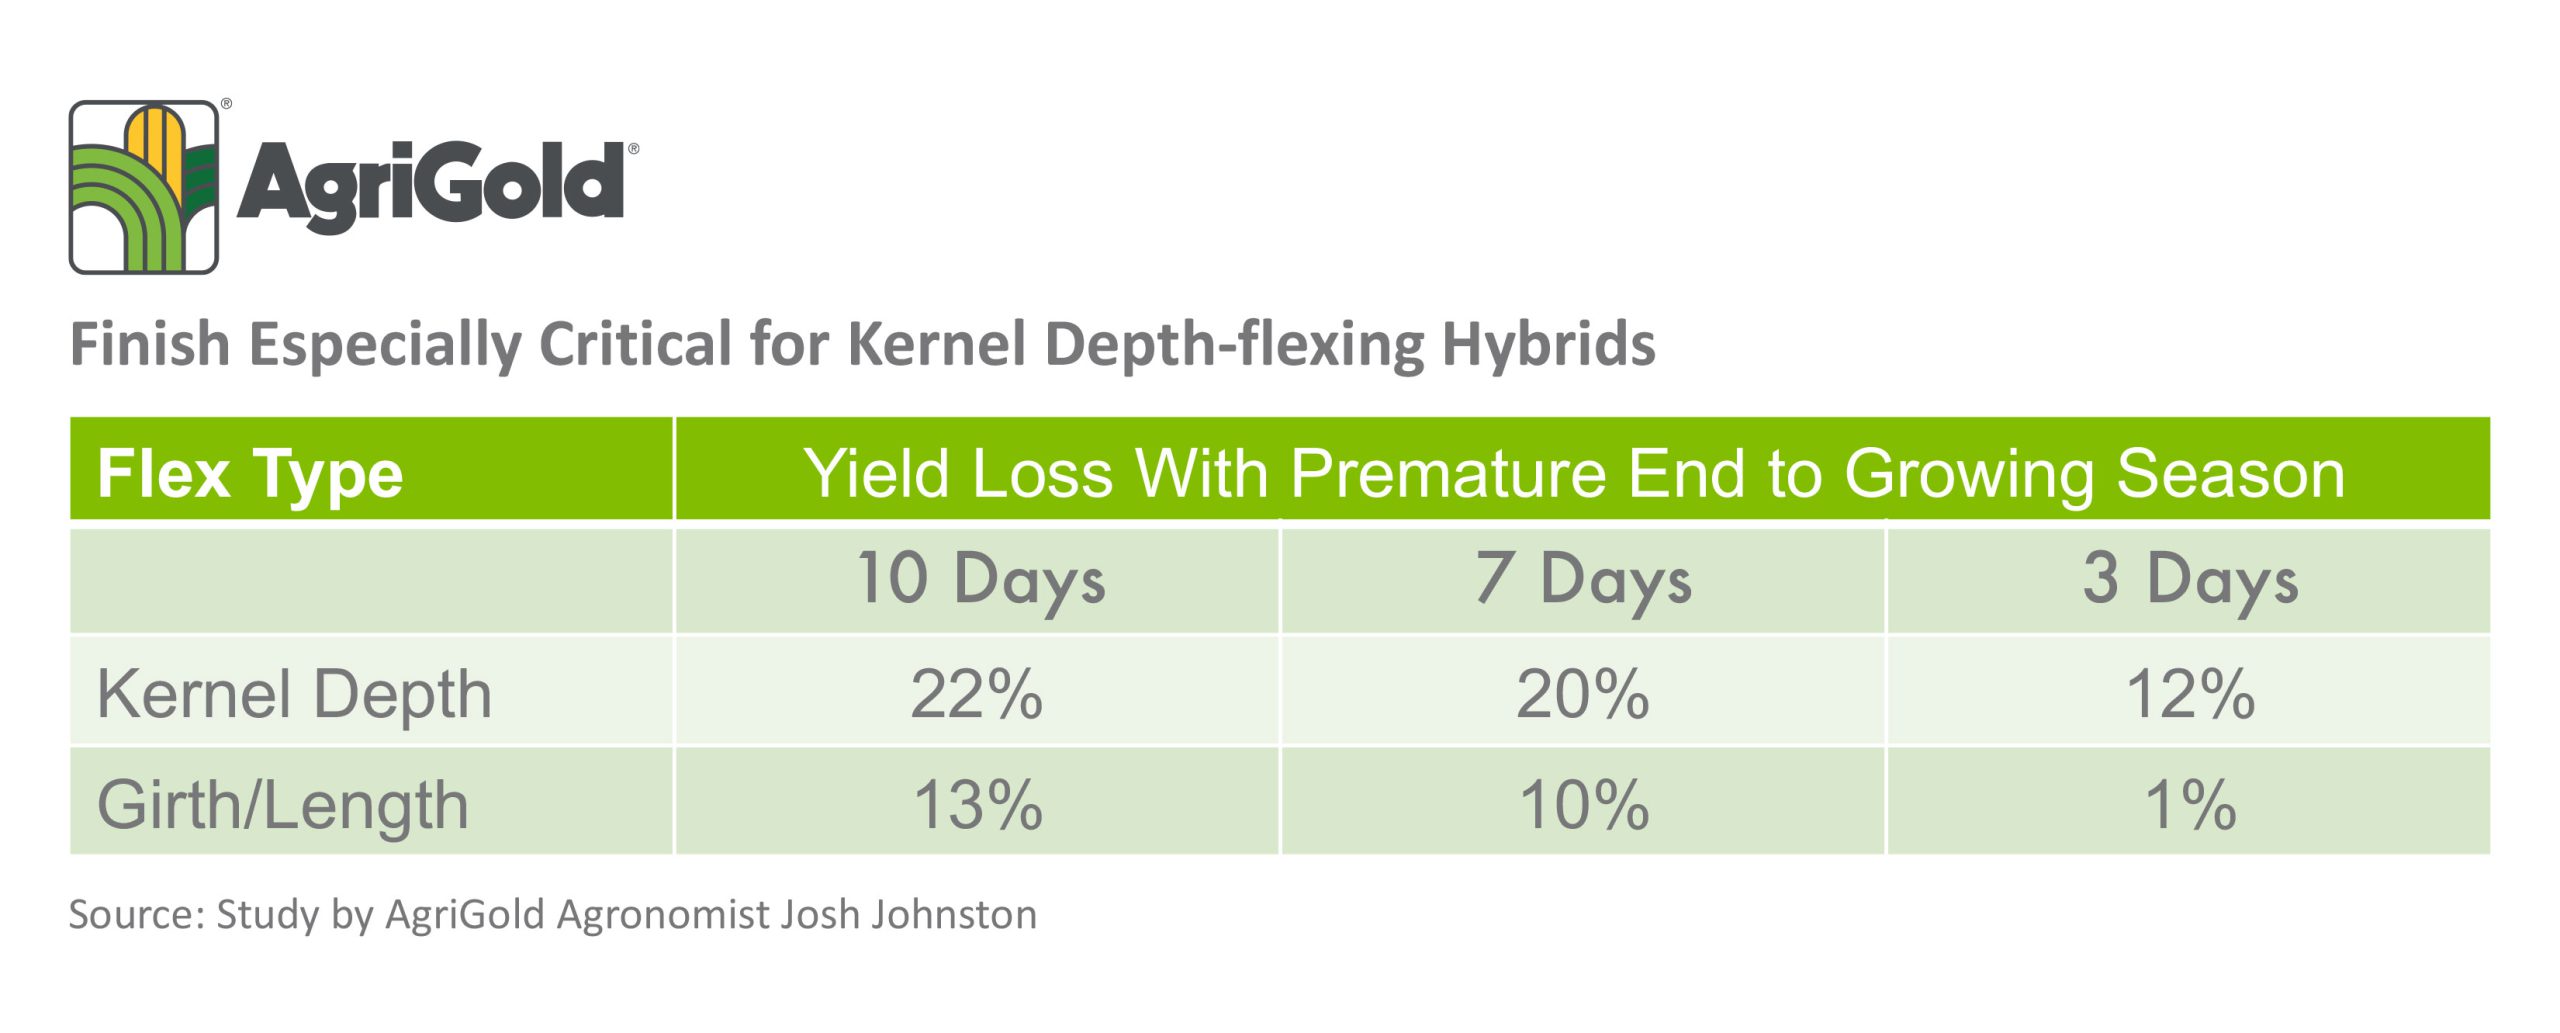 A chart showing flex type and the yield loss with premature end to growing season